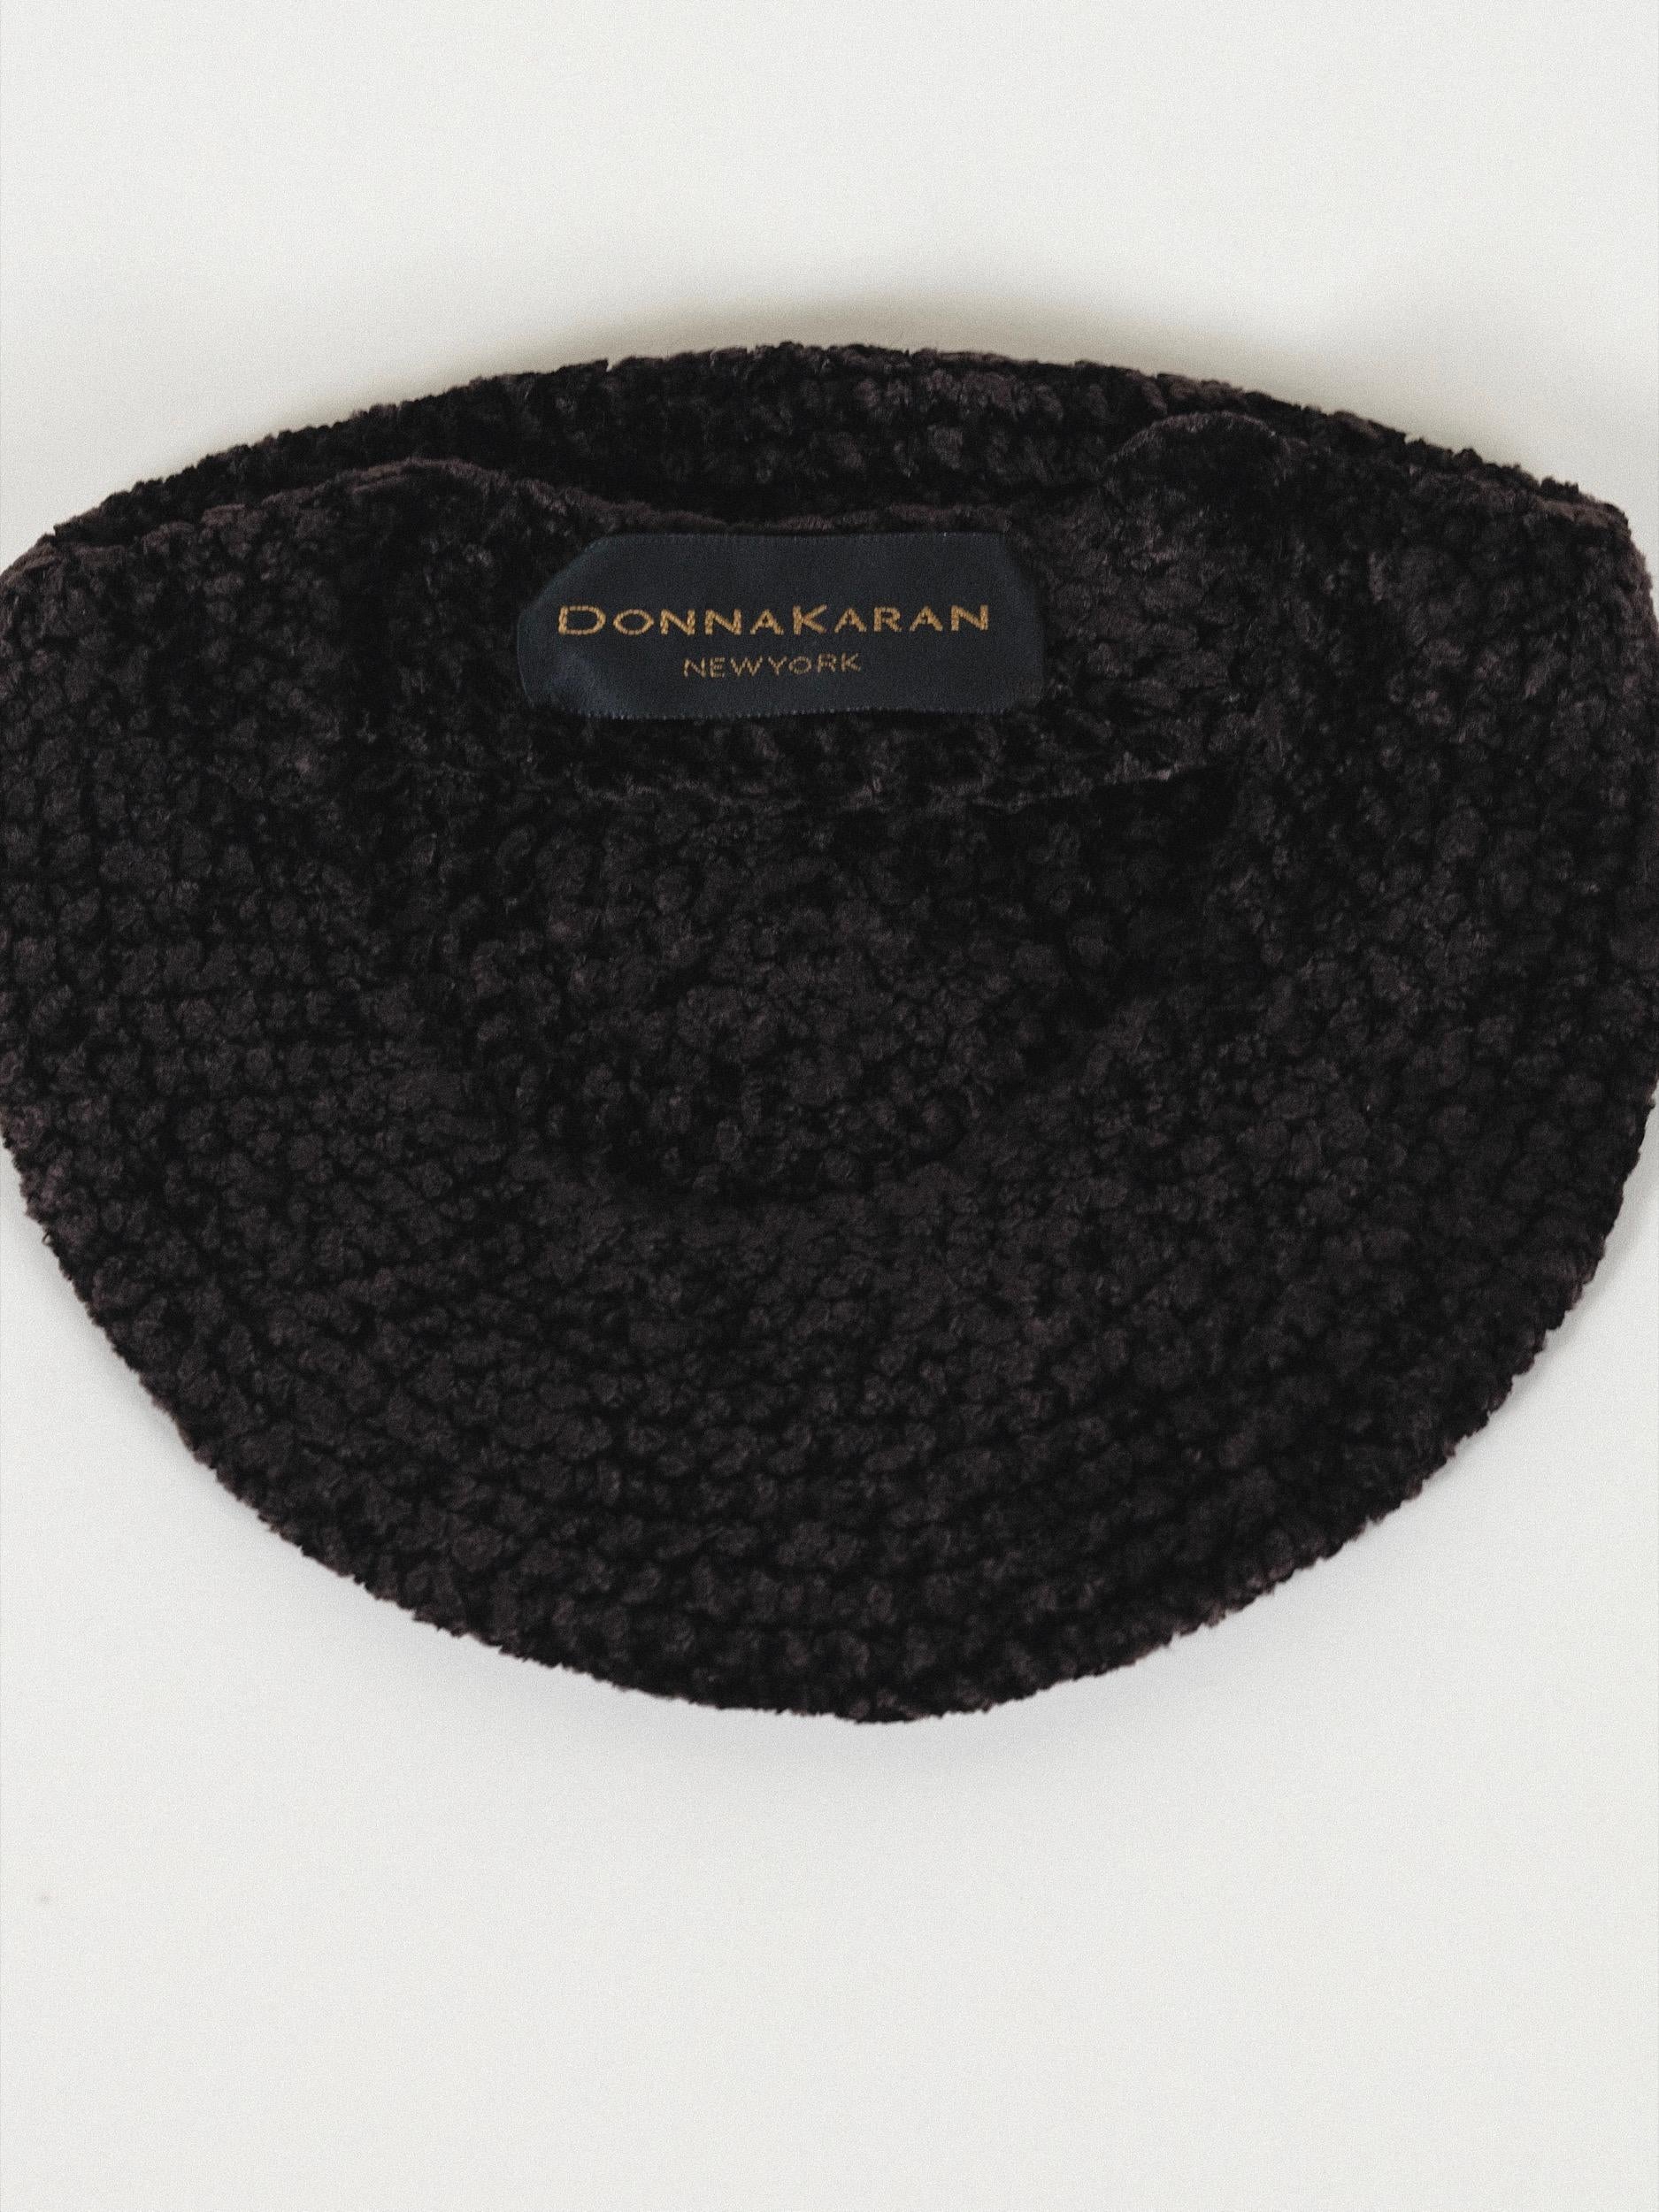 Brown/Black Donna Karan Chenille Beret Hat Fall Winter 1993 Documented  For Sale 11